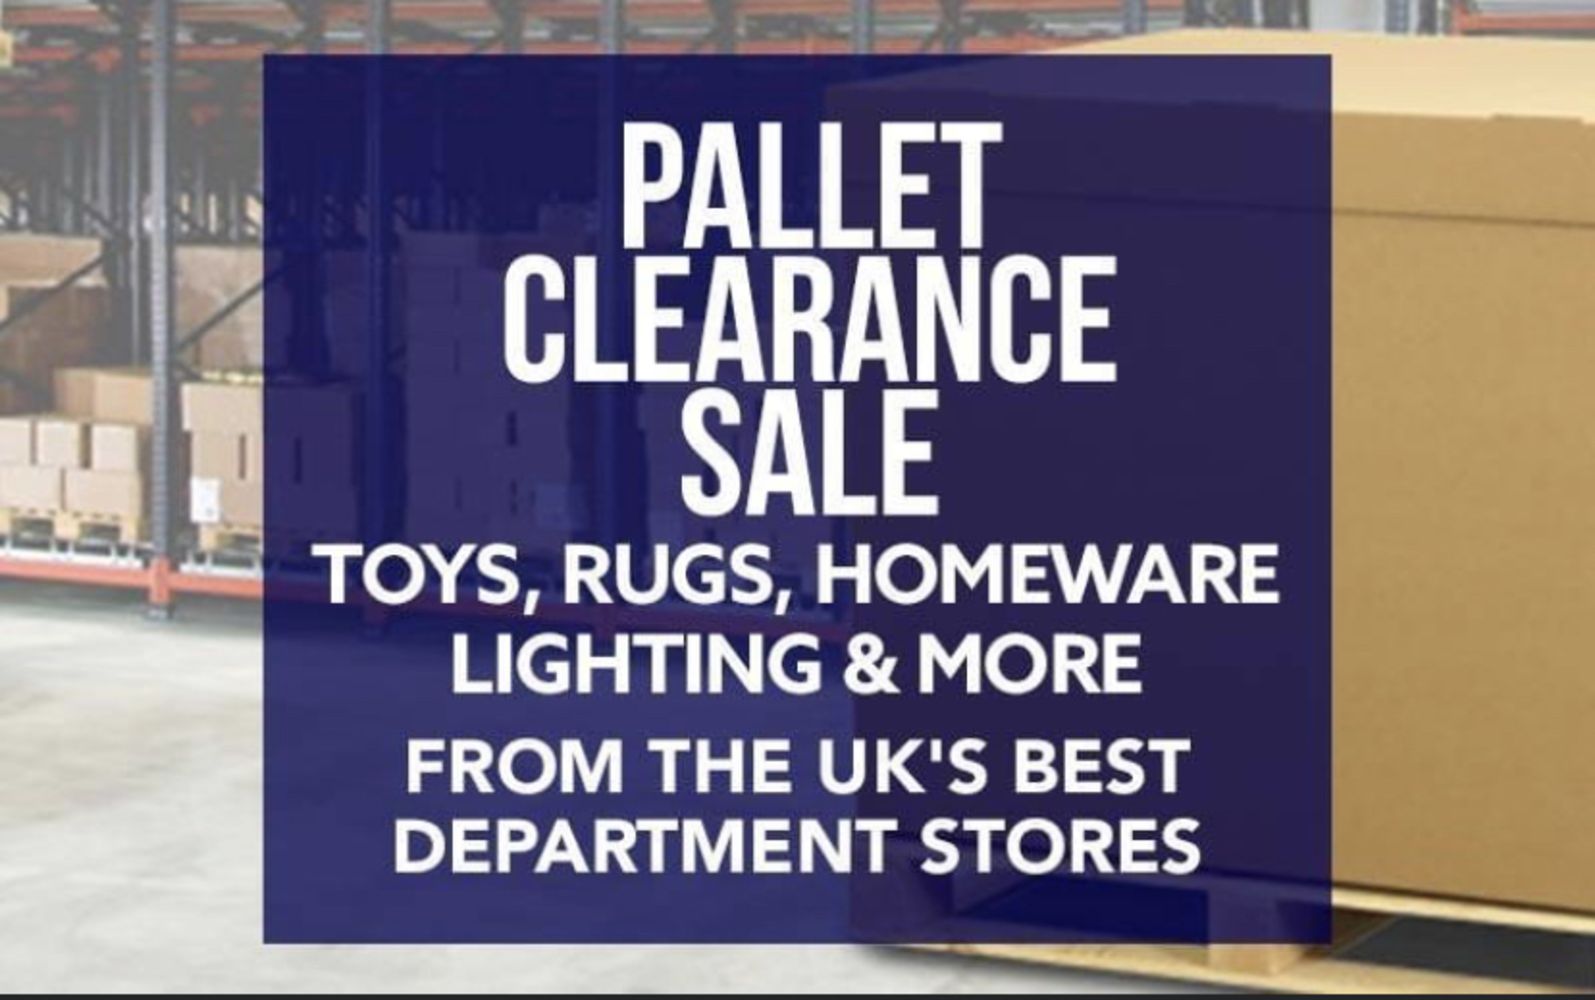 No Reserve - Pallet Clearance Sale! 1st February 2021